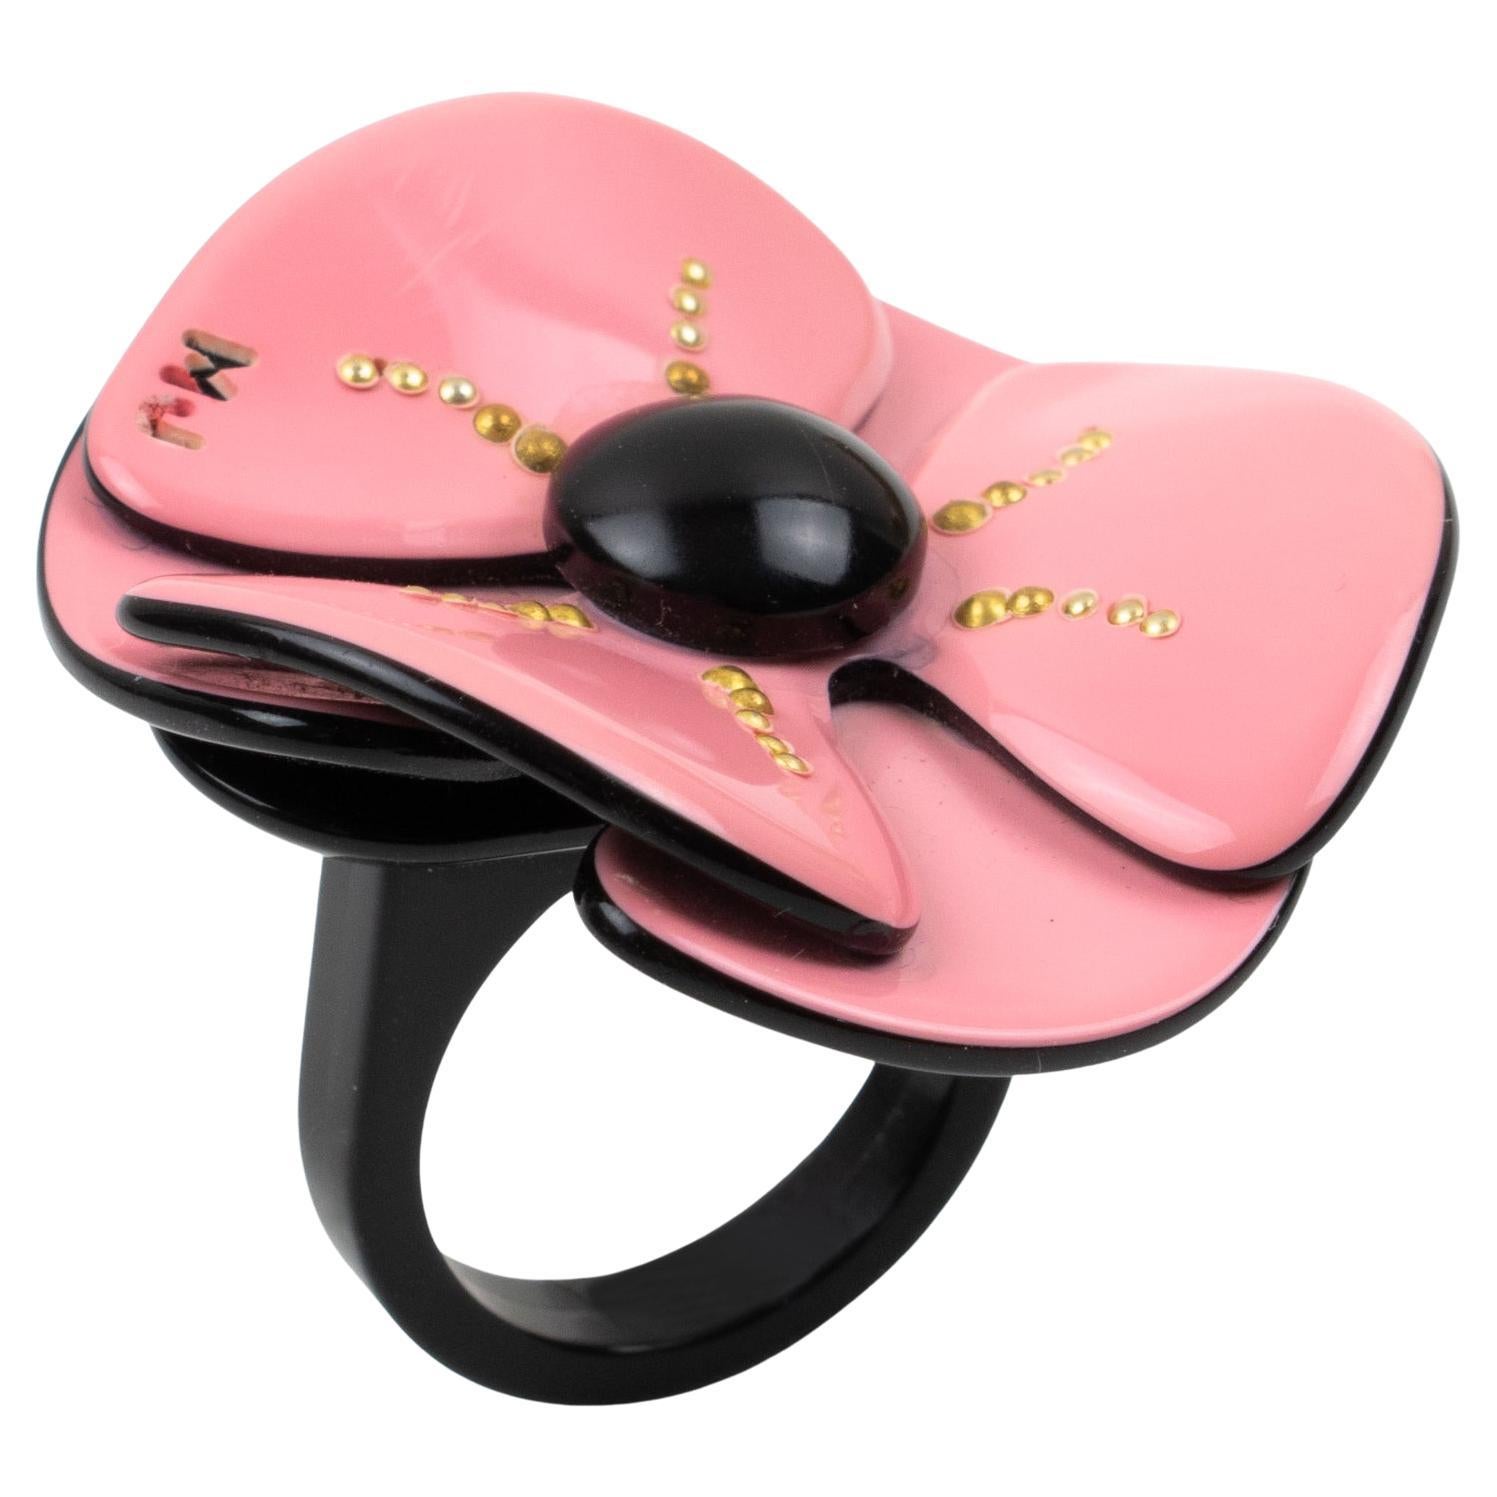 Marc Jacobs Pink and Black Poppy Flower Resin Fashion Ring size 5.5 For Sale